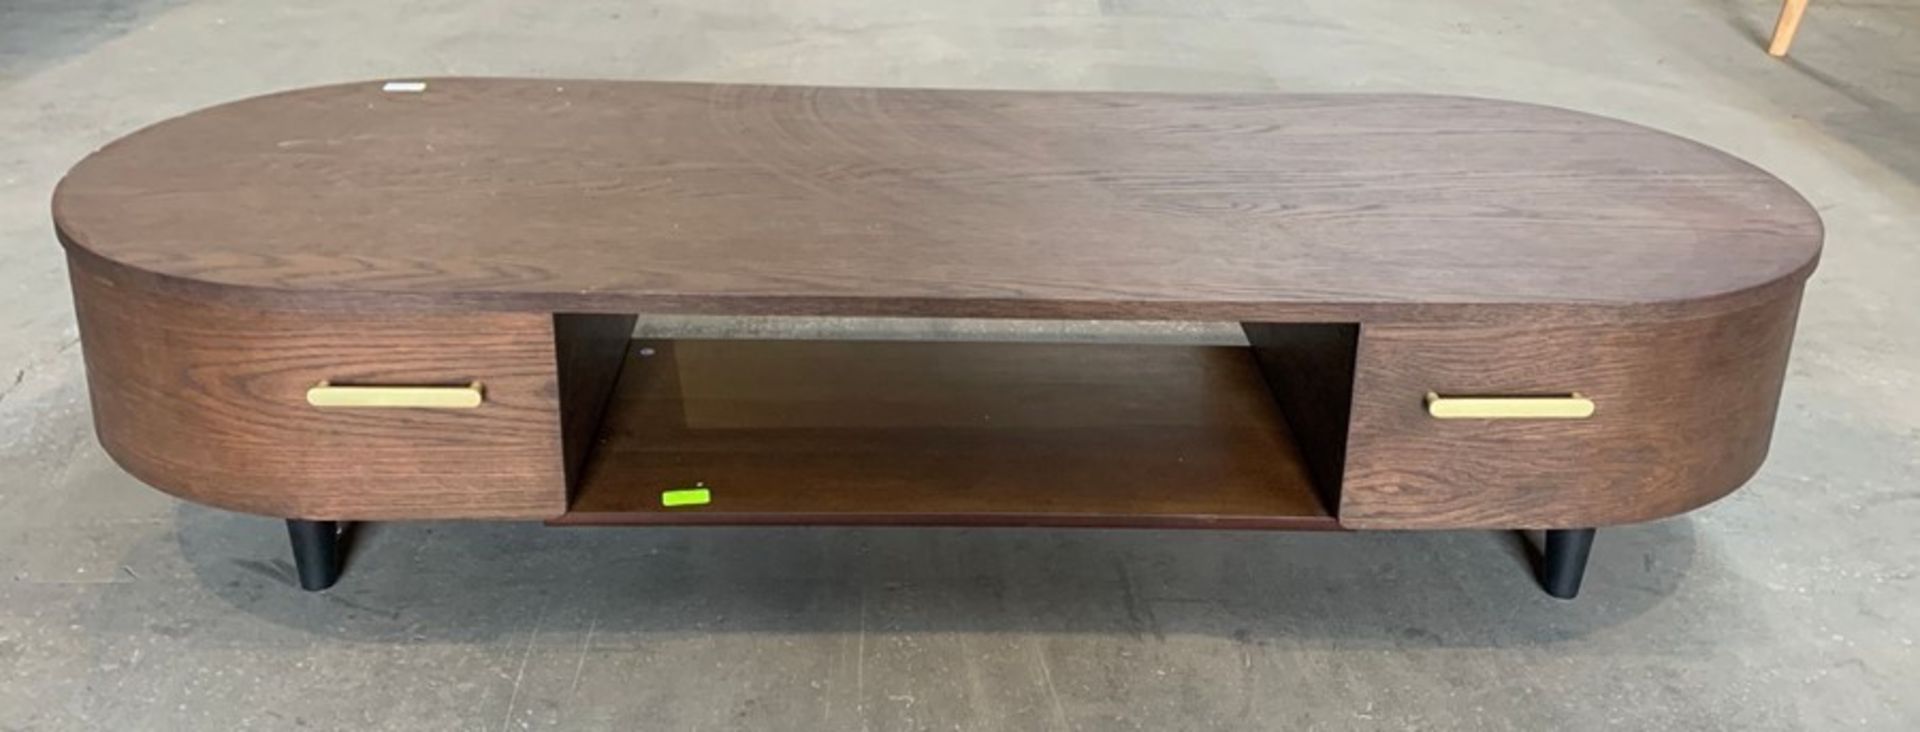 WALNUT BESPOKE DESIGNER TV STAND WITH 2 DRAWERS (PUBLIC VIEWING AVAILABLE/RECOMMENDED)